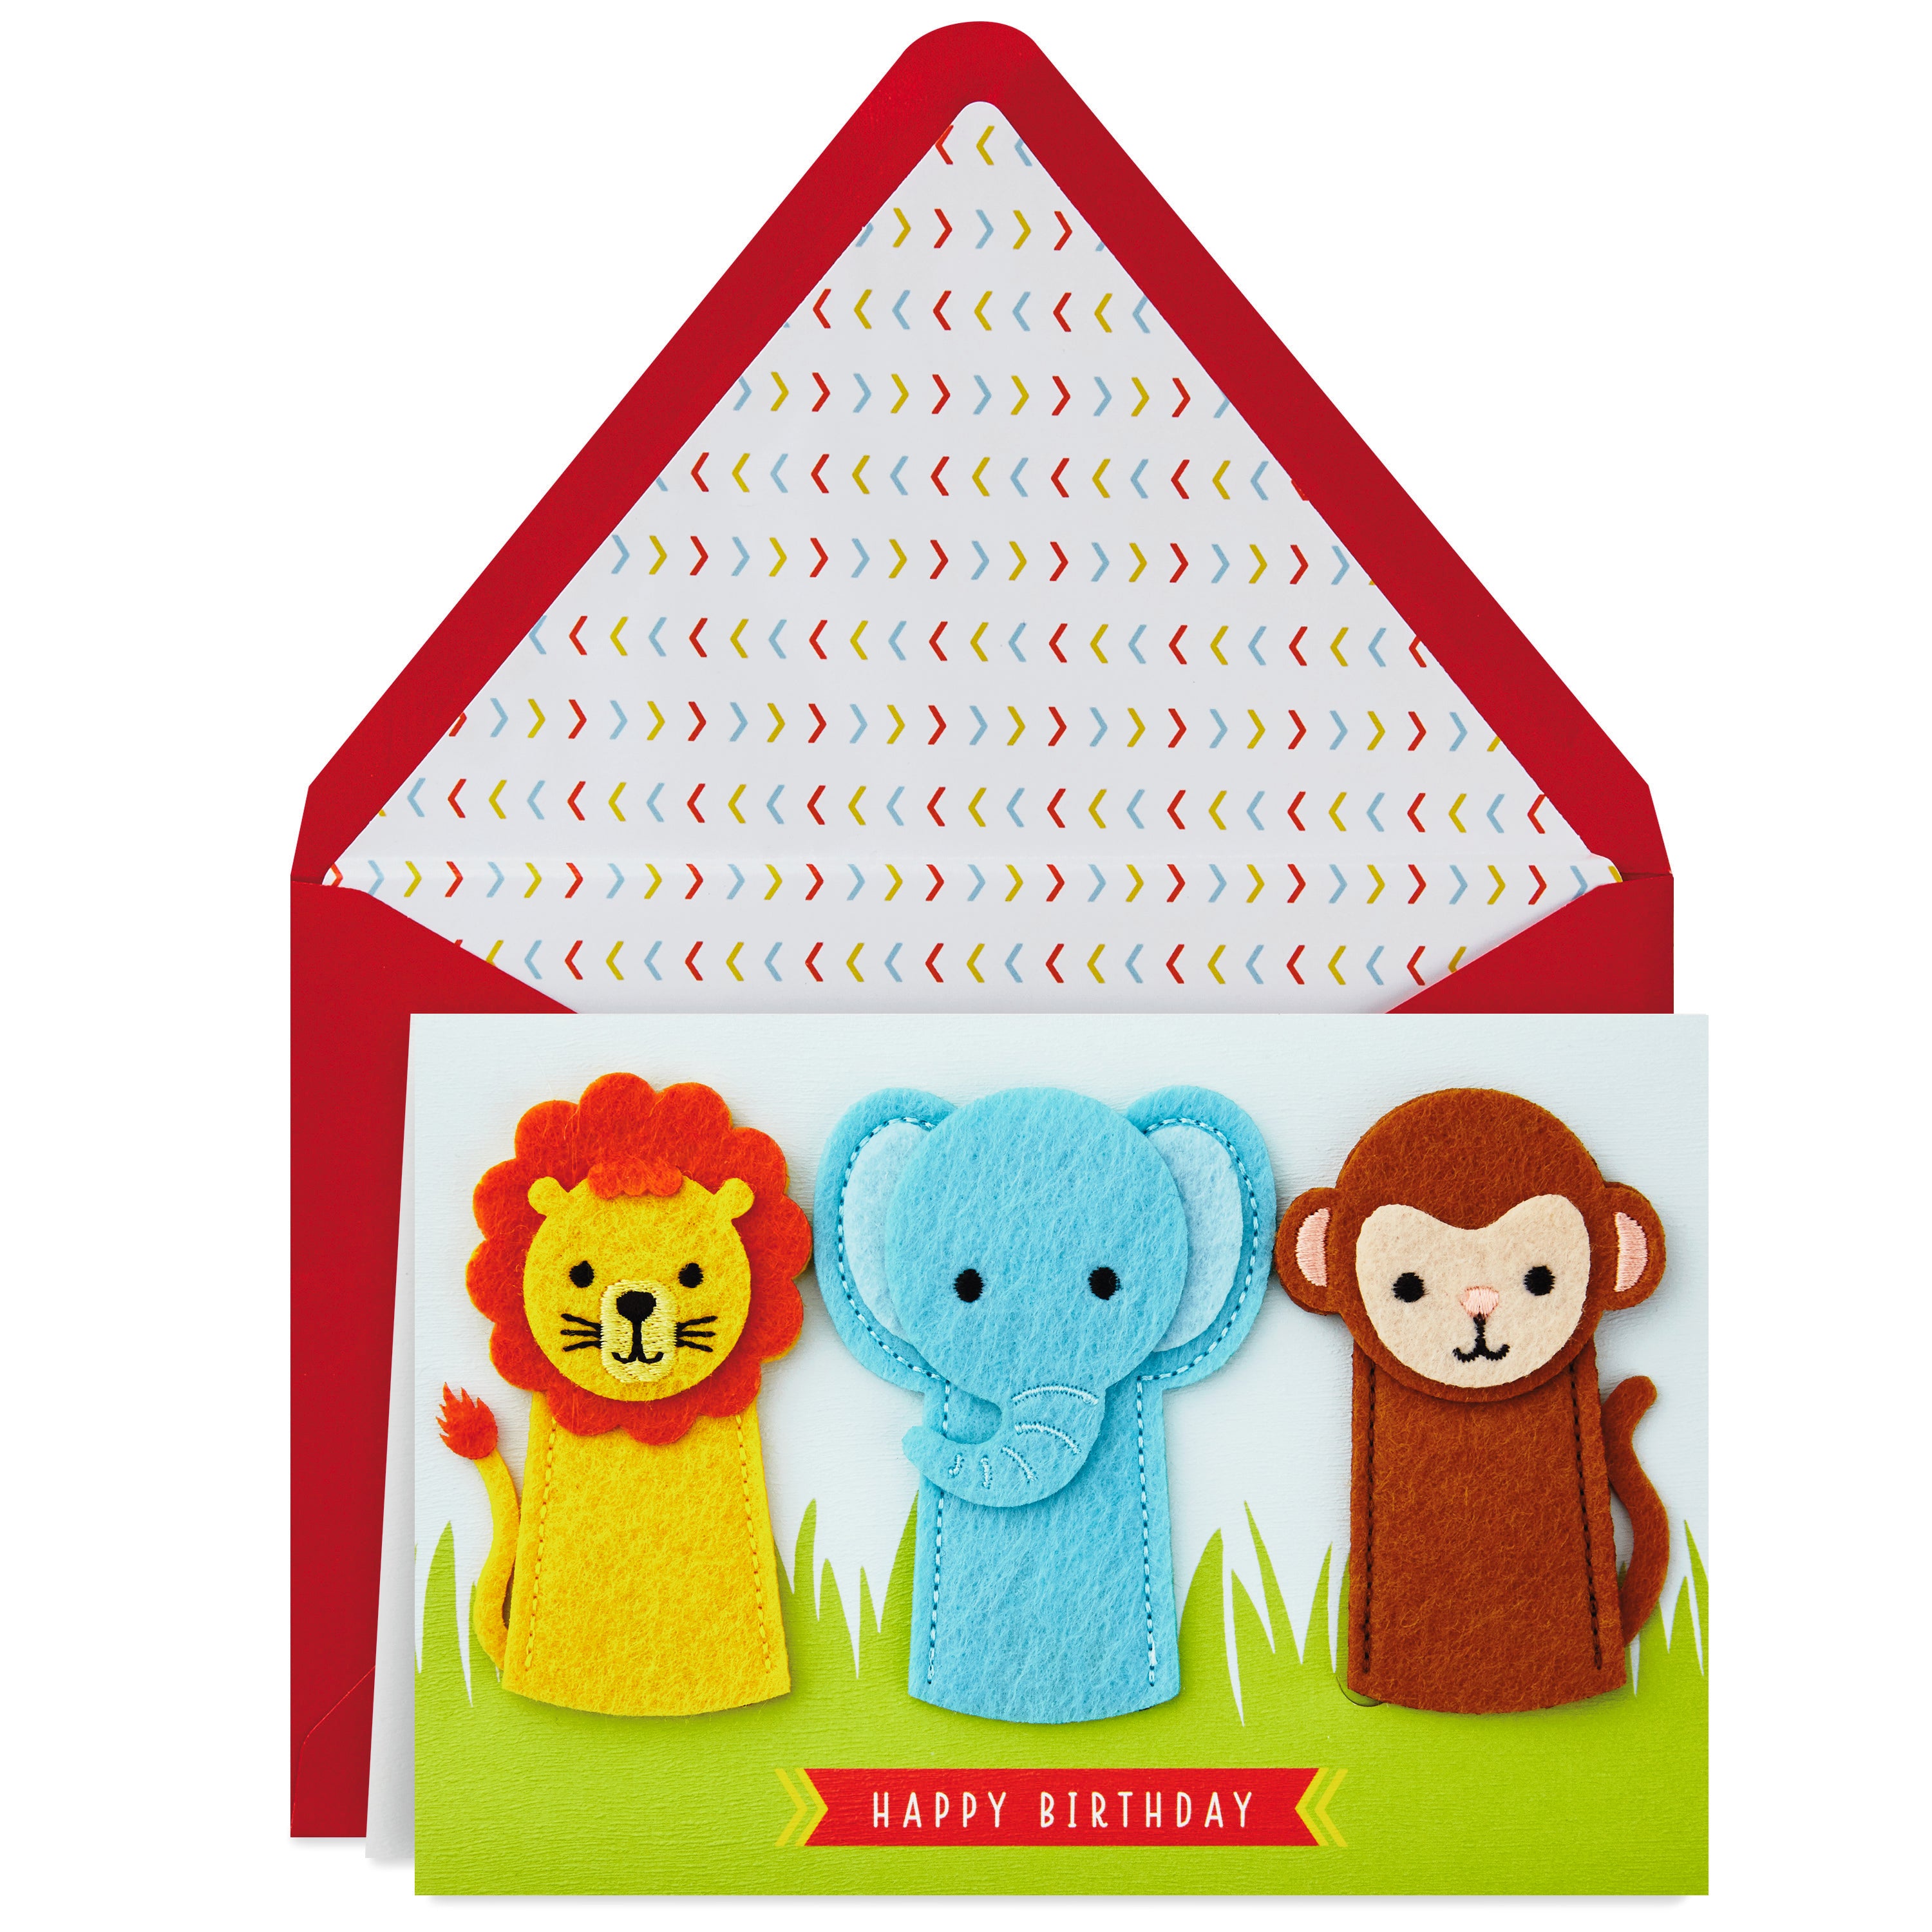 Signature Birthday Card with Removable Finger Puppets for Kids (Jungle Animals)